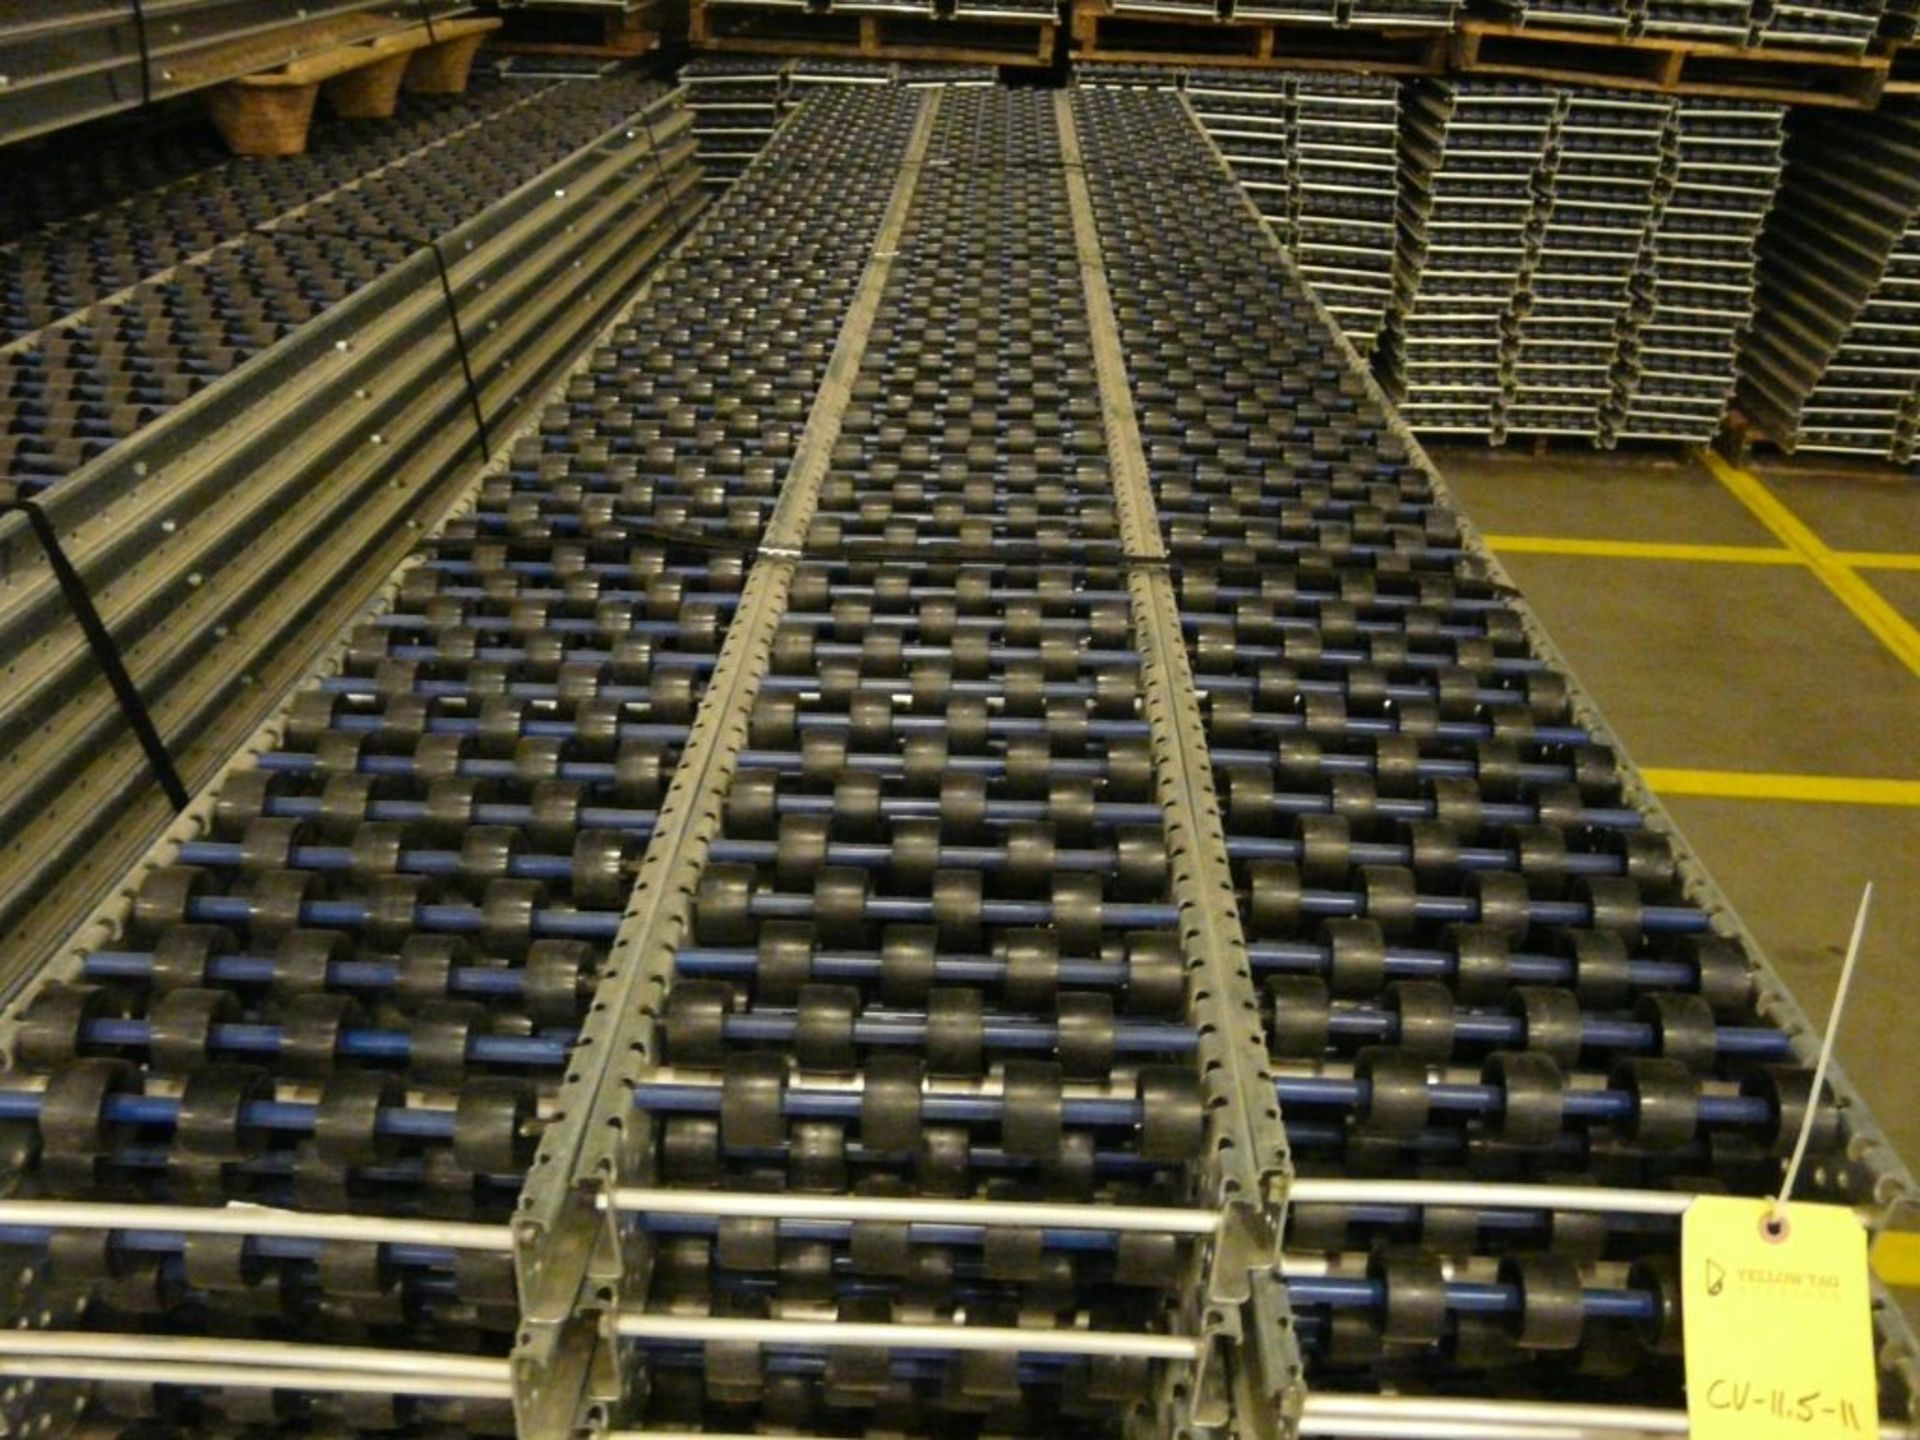 Lot of (90) SpanTrack Wheelbed Carton Flow Conveyors - 11.5'L x 11"W; Tag: 224214 - $30 Lot - Image 3 of 4